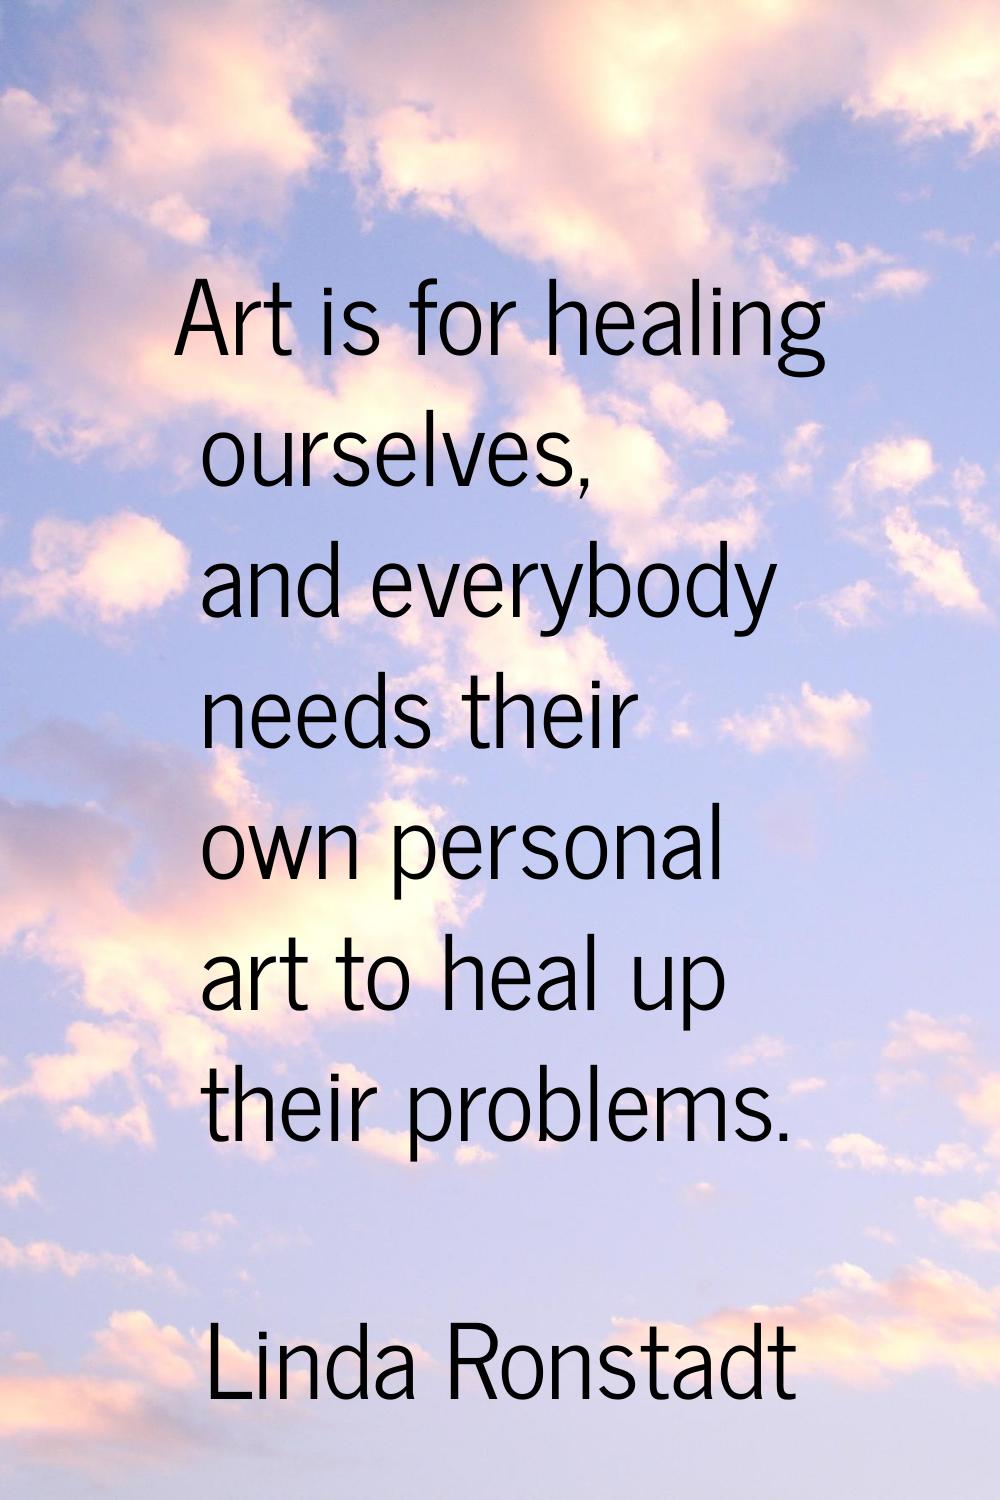 Art is for healing ourselves, and everybody needs their own personal art to heal up their problems.